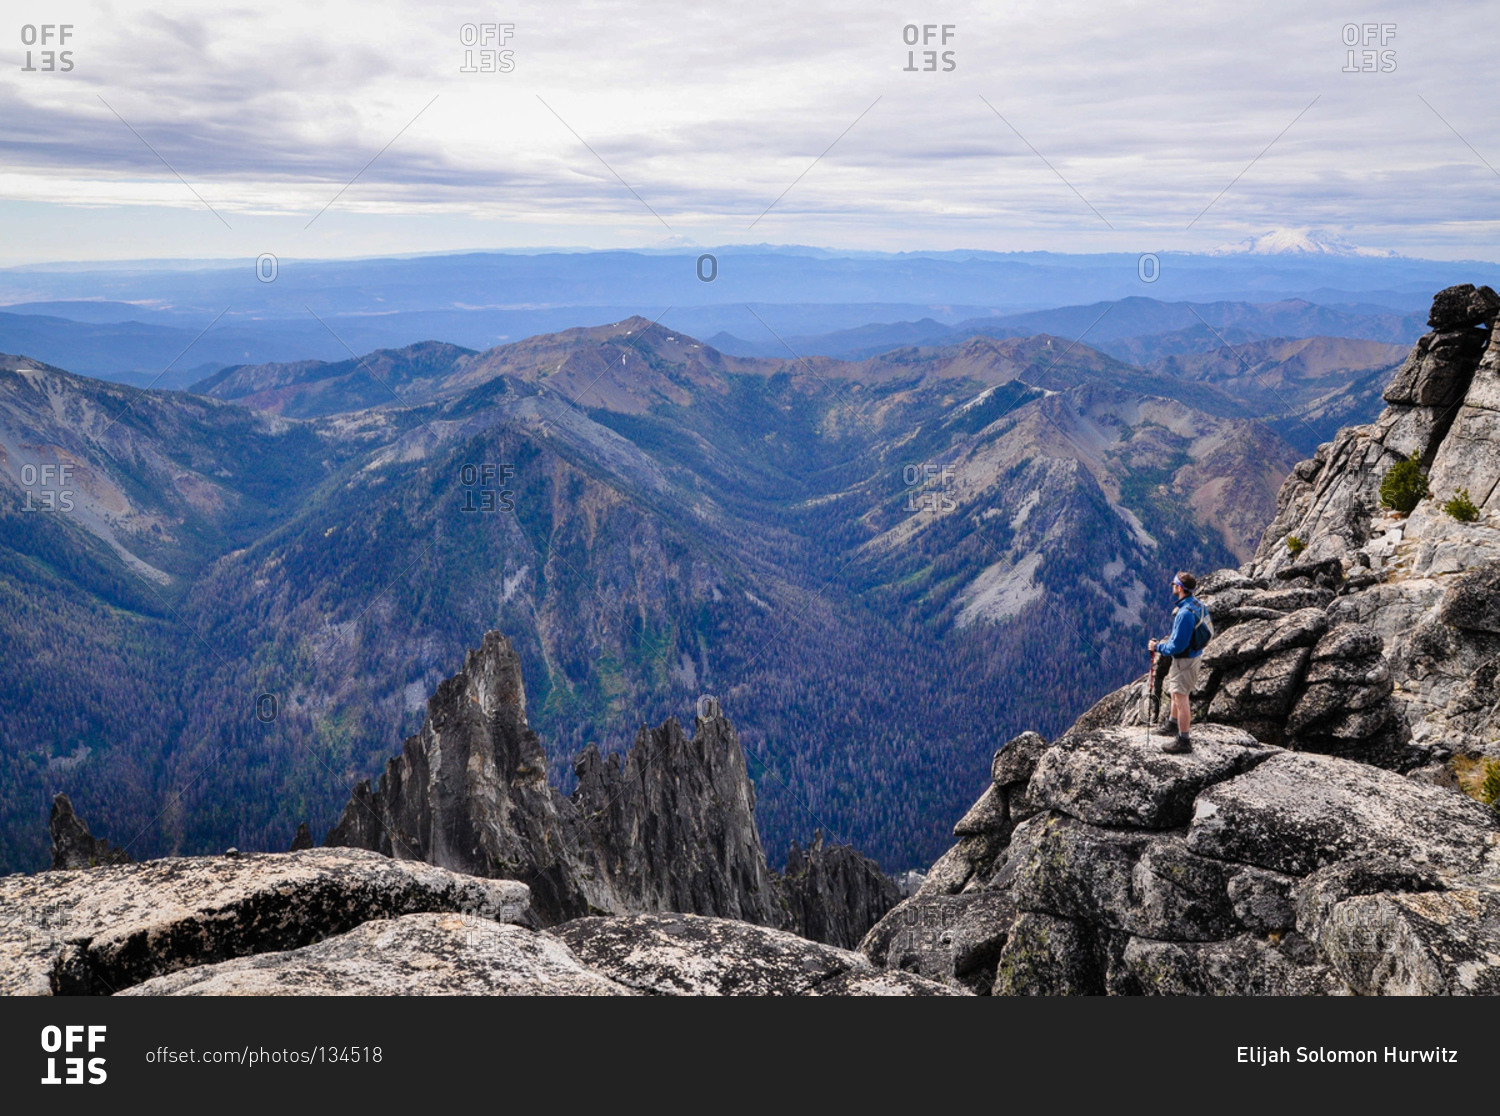 Hiker taking in the view of a mountain range